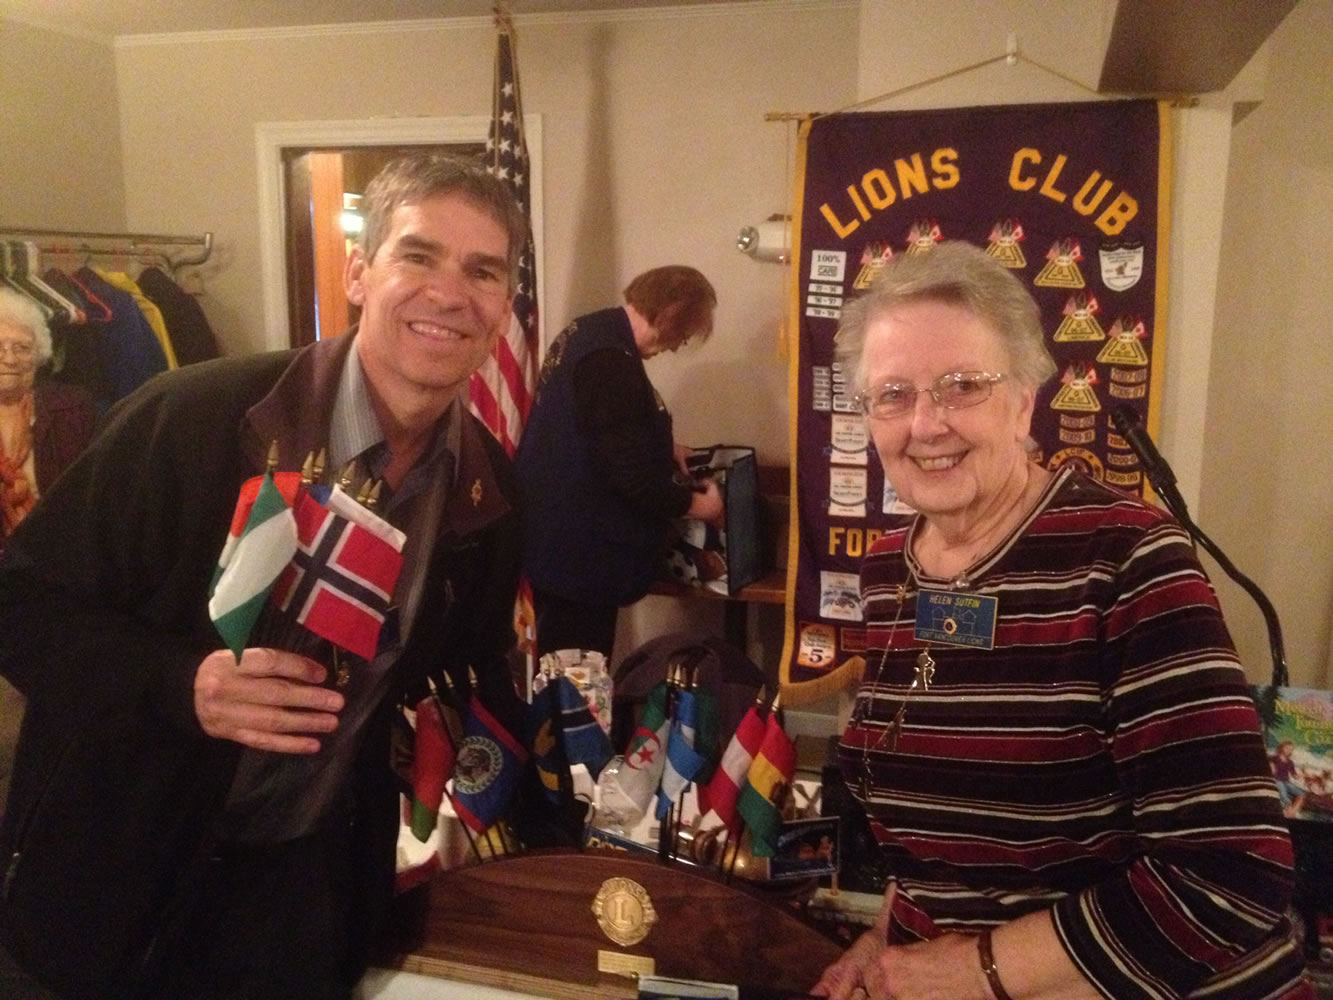 Rose Village: Fort Vancouver Lions Club Membership Director Roy Pulliam and 2011 President Helen Sutfin helped guide the organization's membership growth between 2011 and 2012, which won the club an international honor.